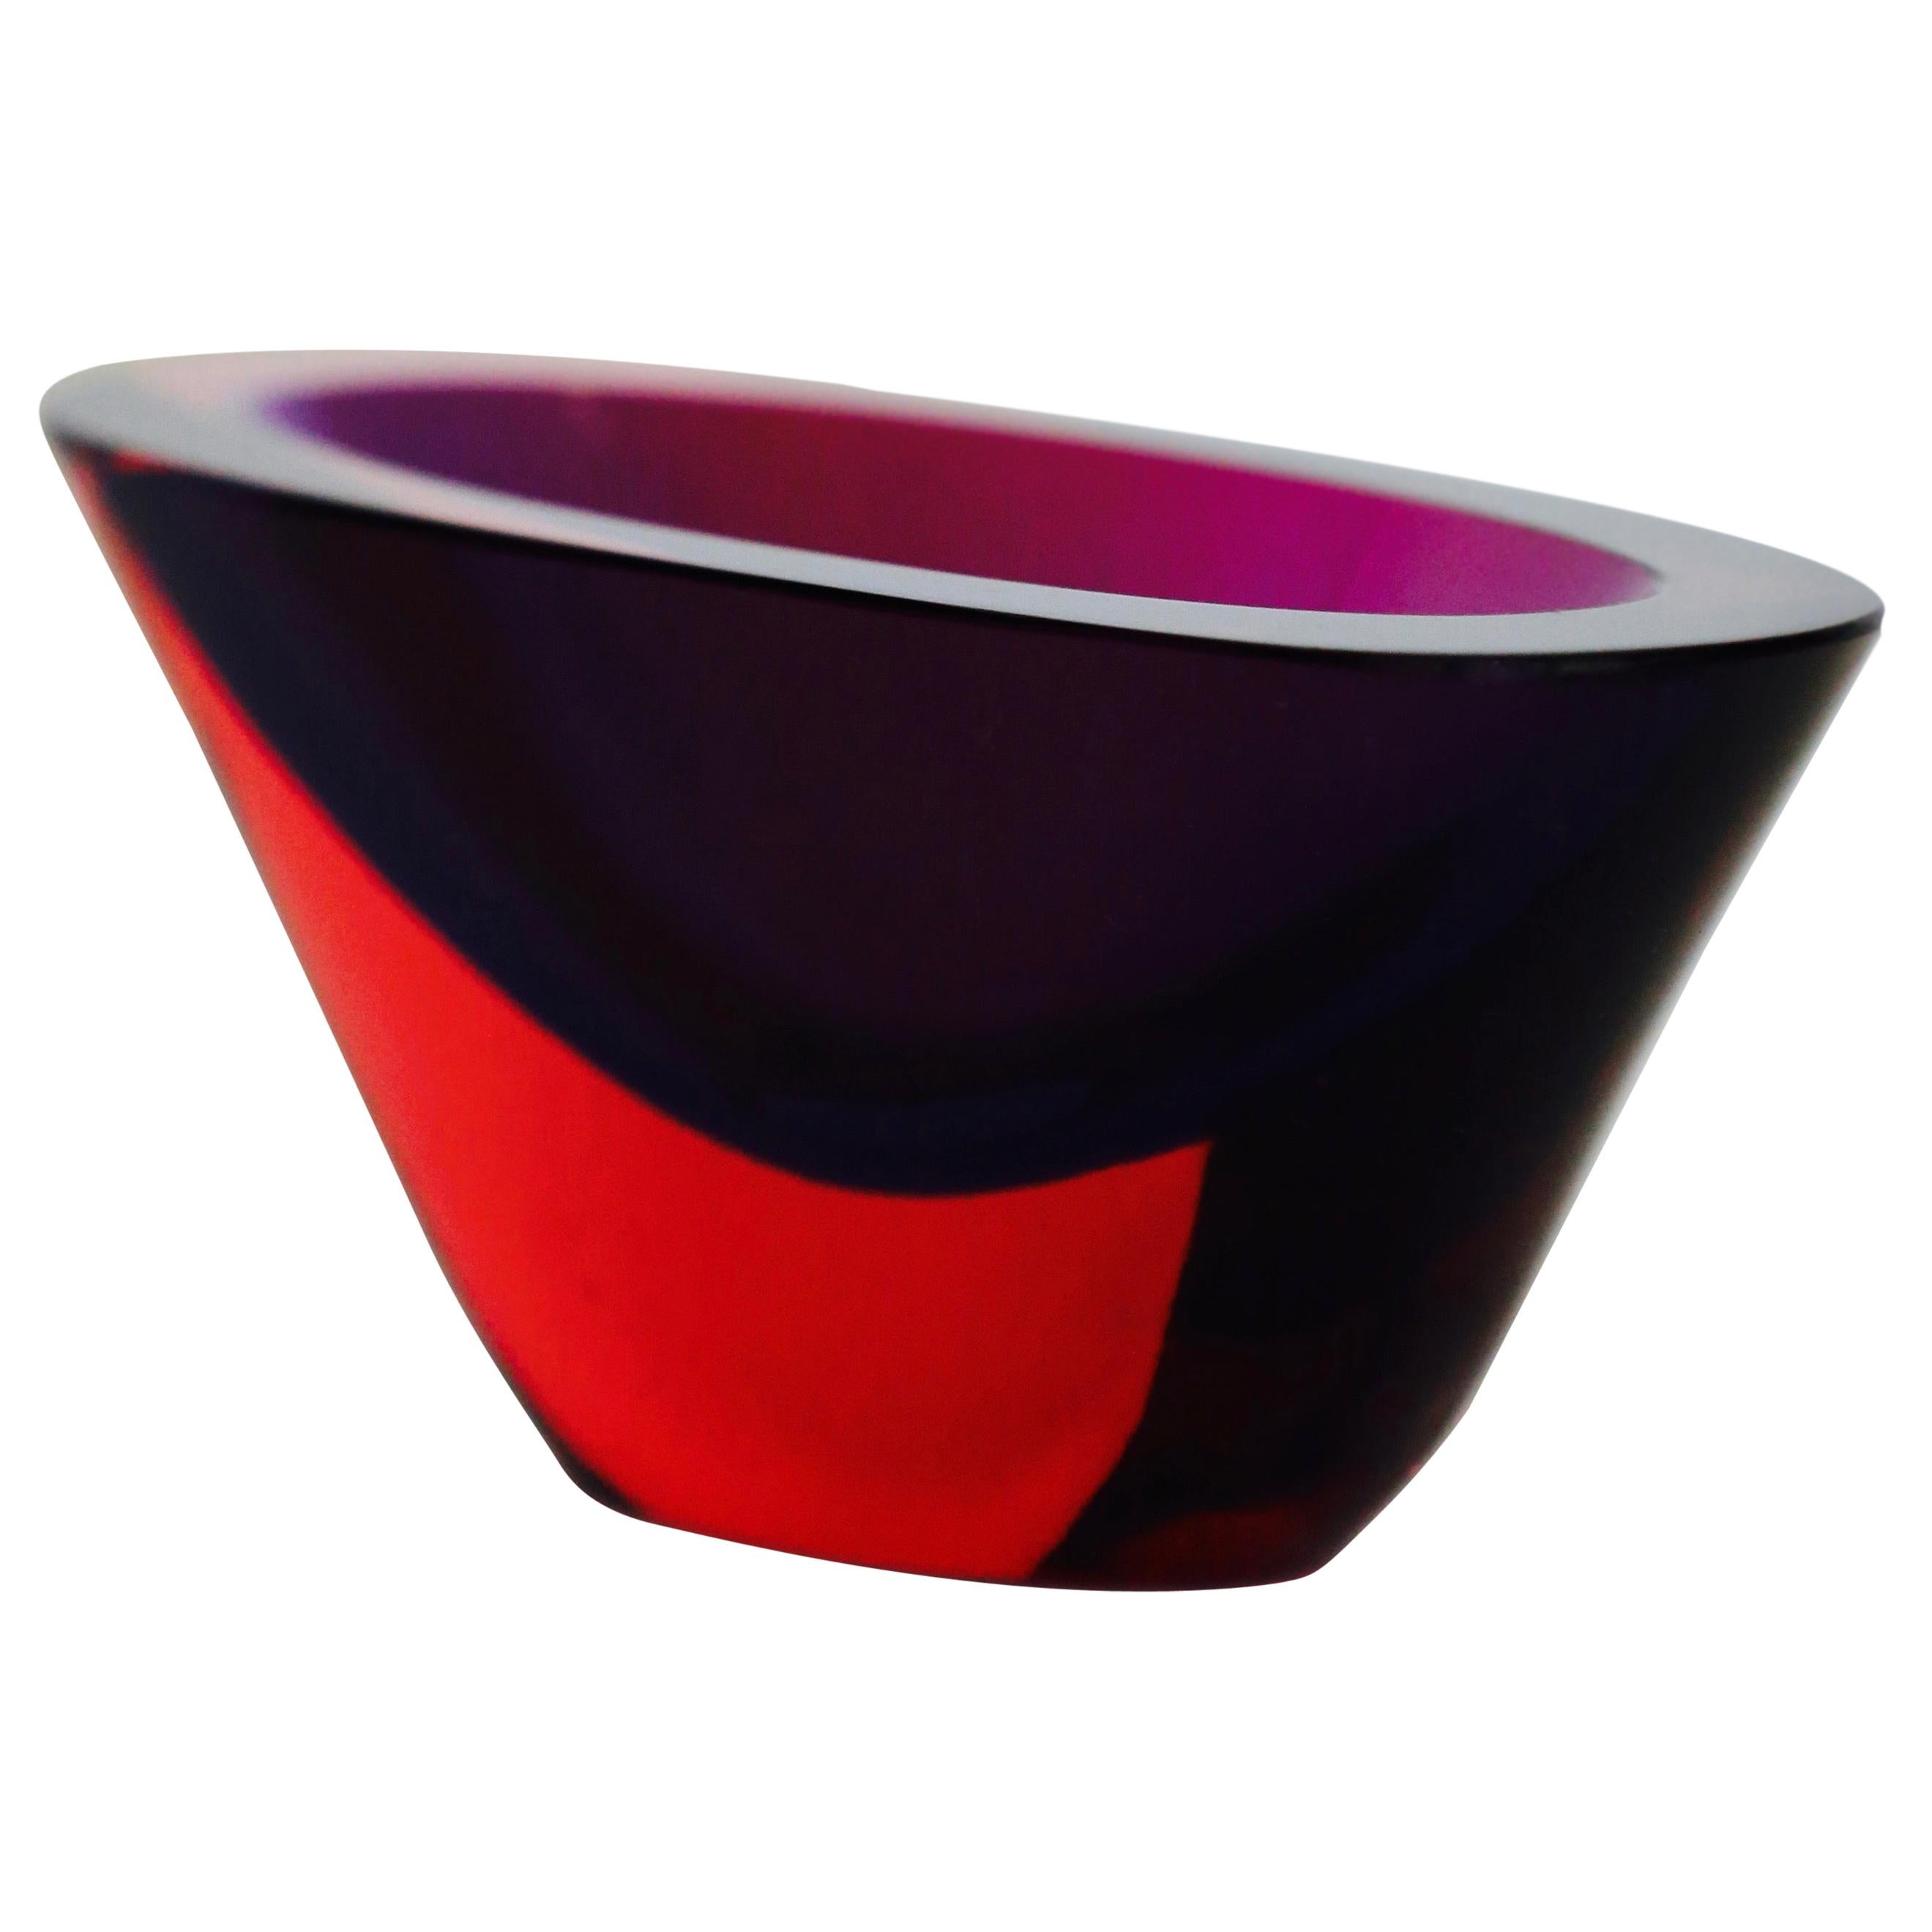 Red purple blue small Sommerso vase by Flavio Poli.
Perfect condition.